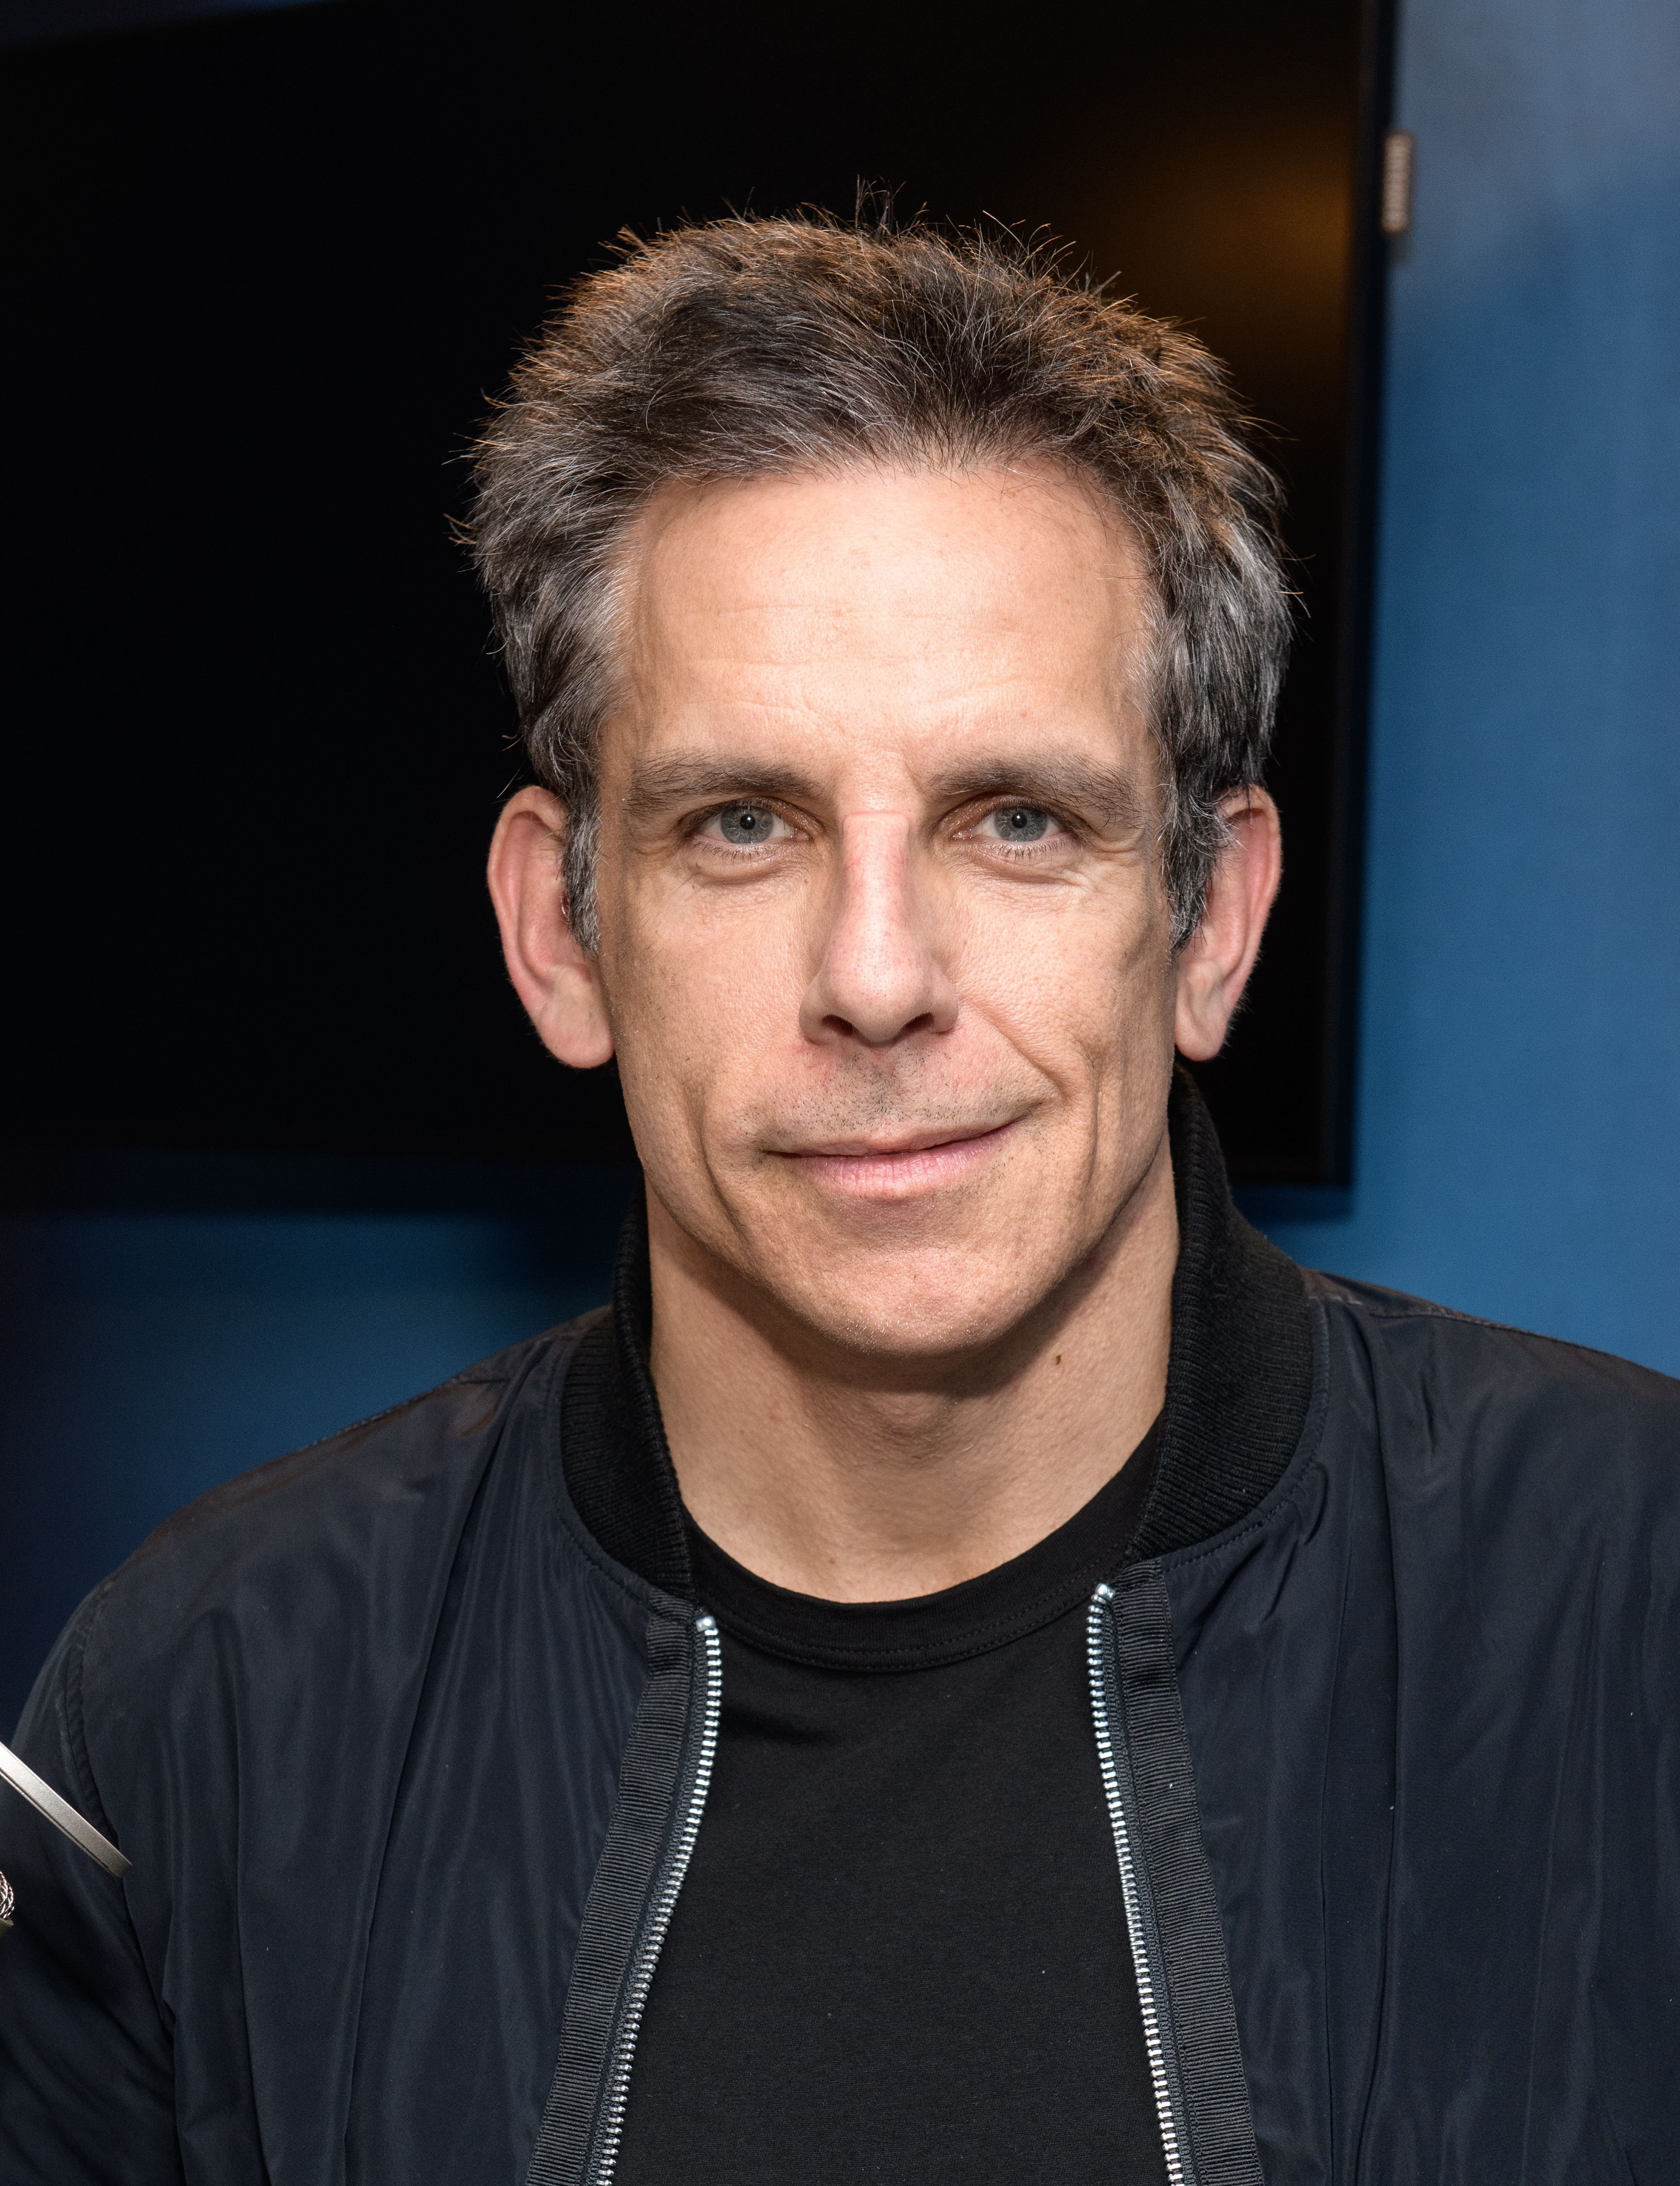 Ben Stiller during a visit to the SiriusXM Studios in New York City | Photo: Noam Galai/Getty Images